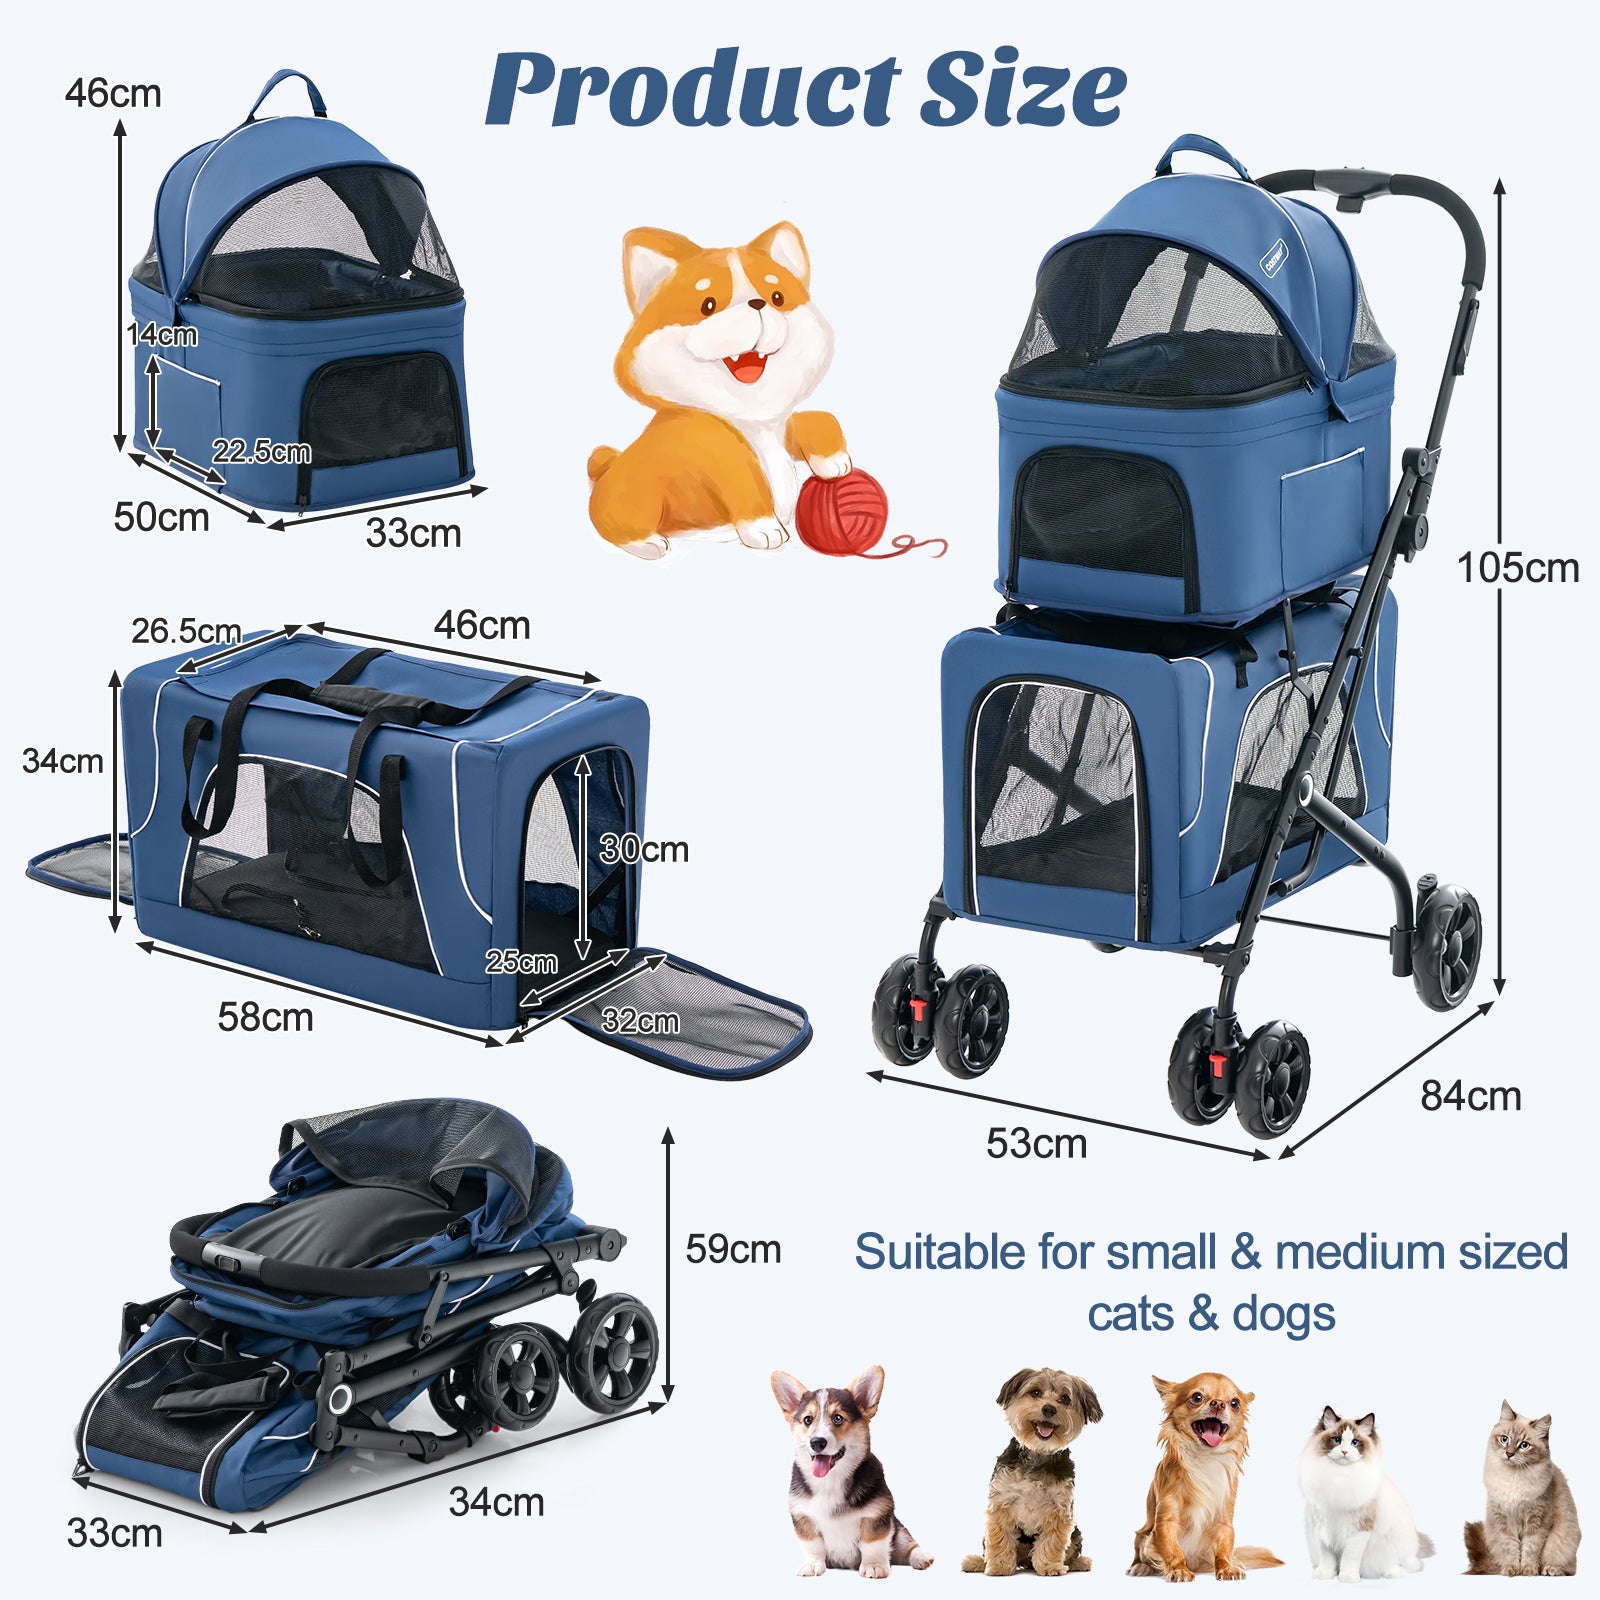 Foldable Double Pet Stroller with Detachable Carriers-Blue